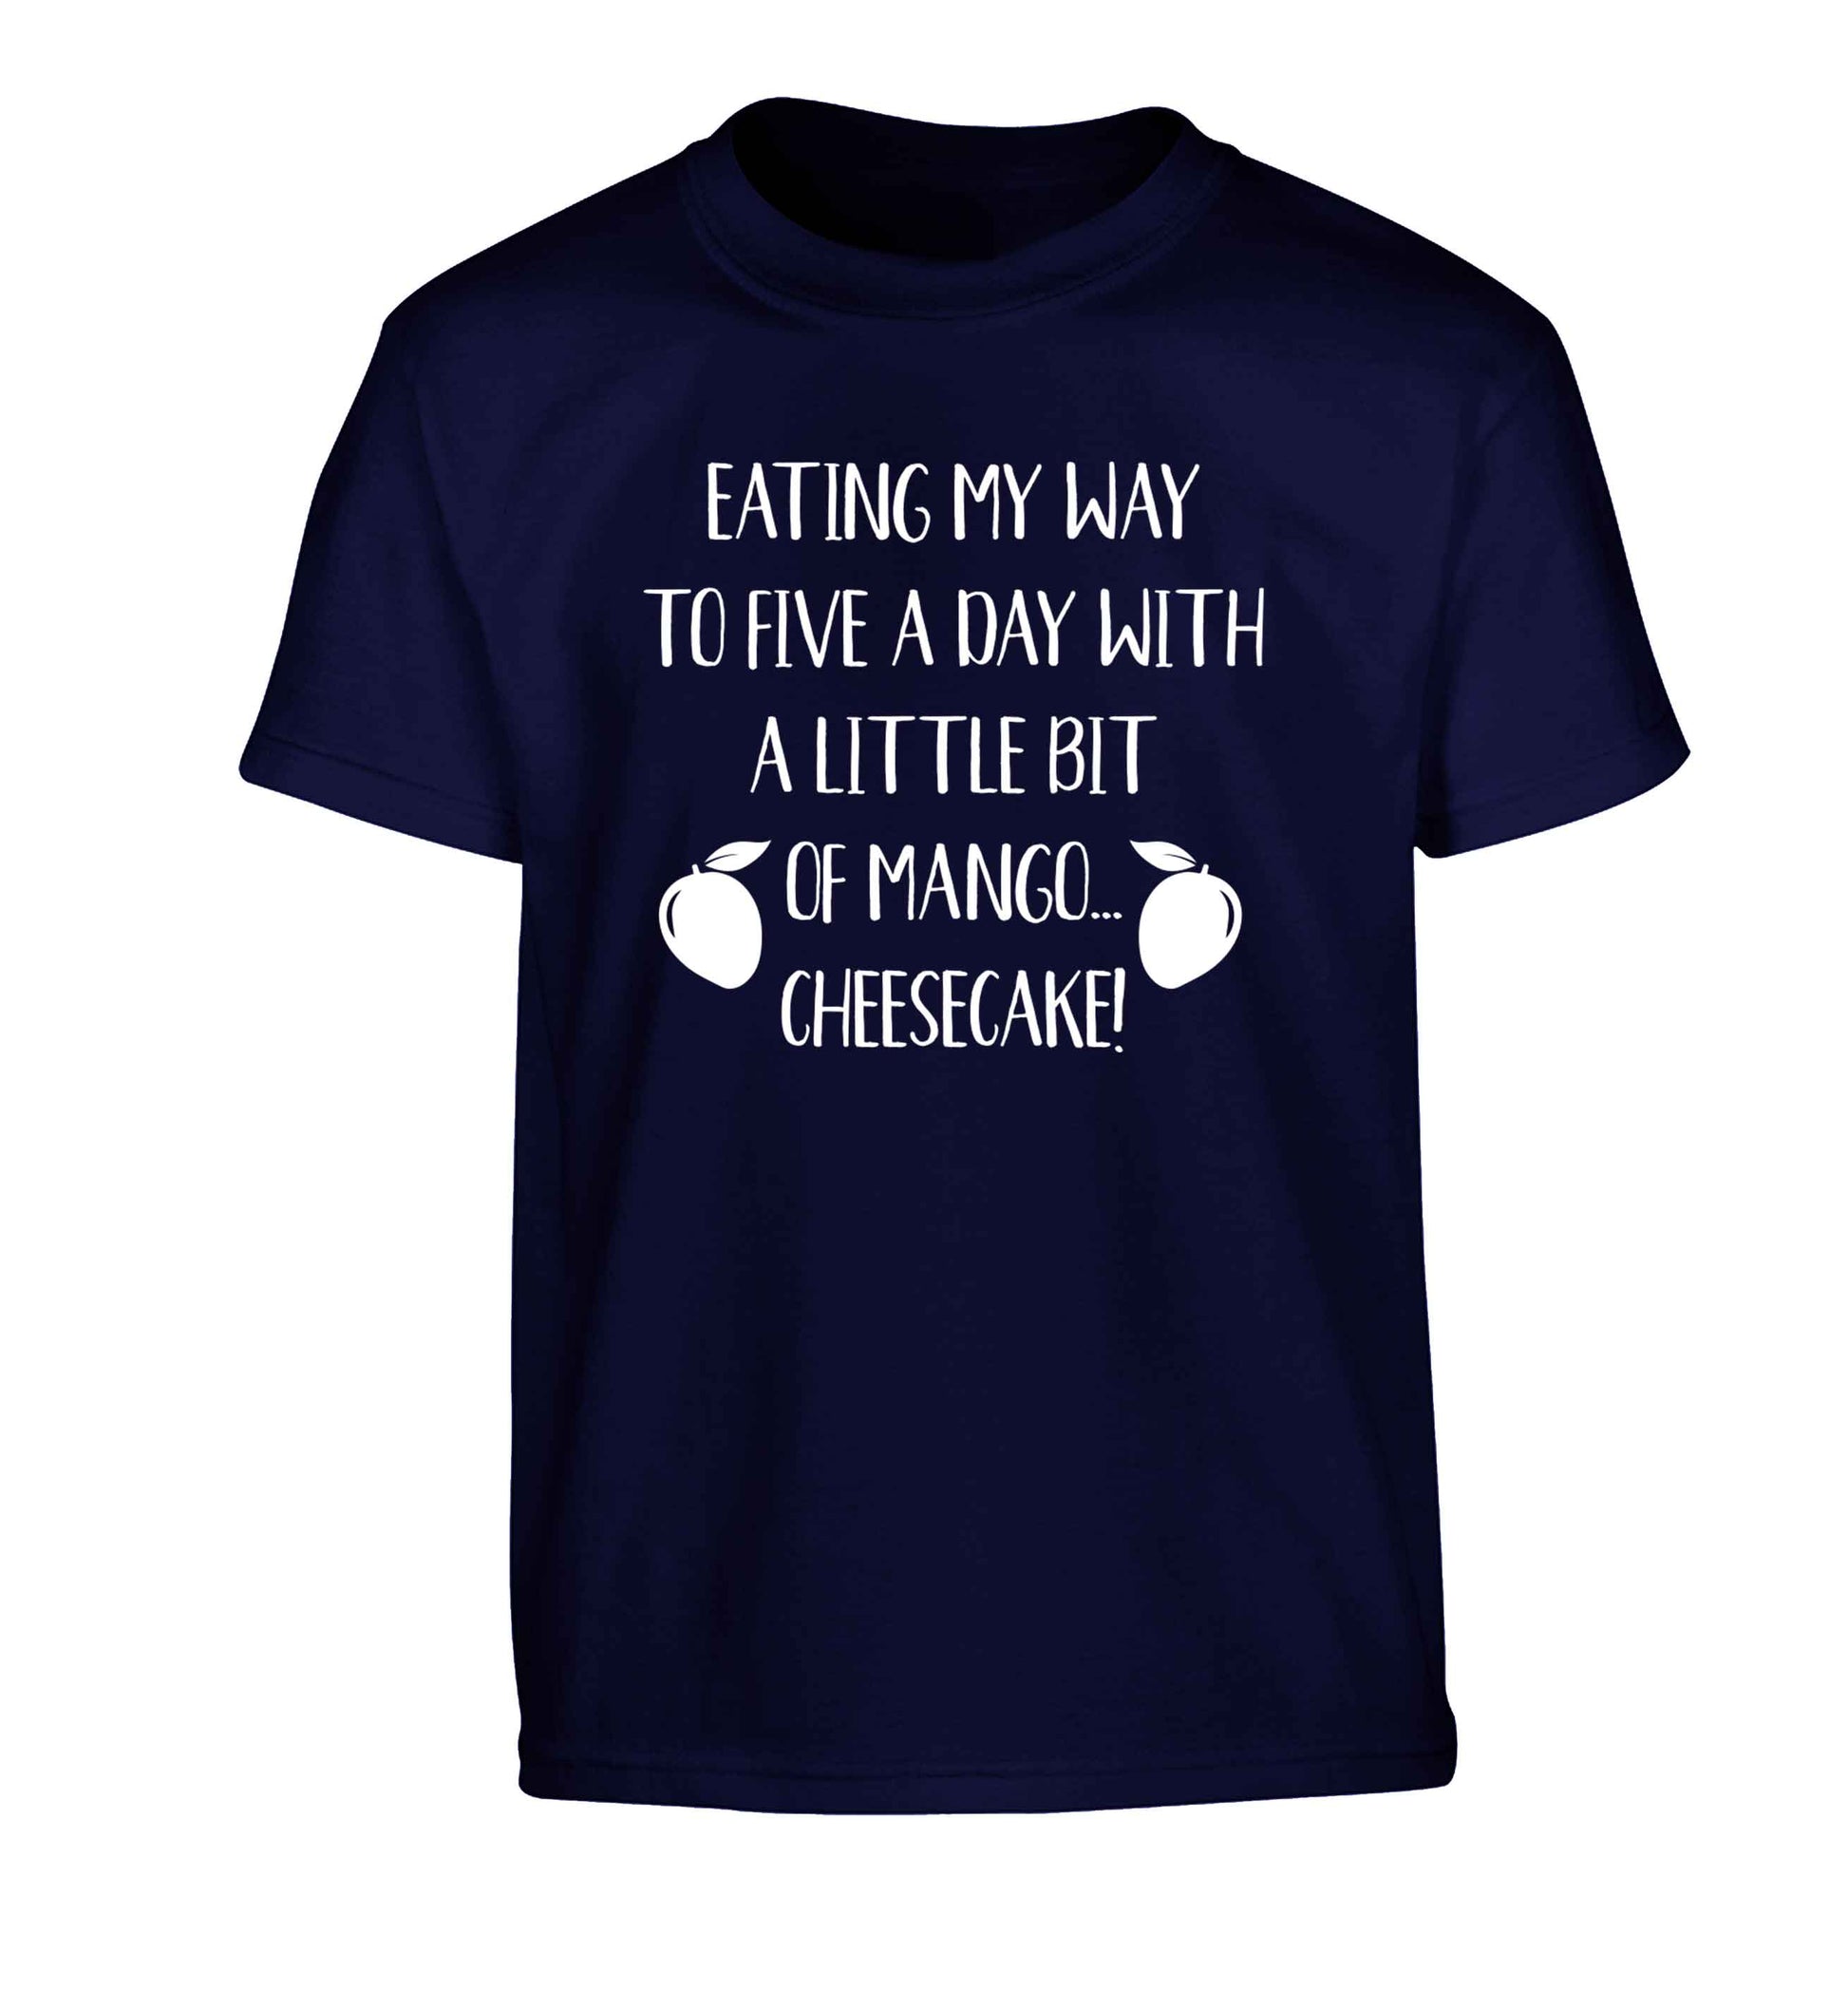 Eating my way to five a day with a little bit of mango cheesecake Children's navy Tshirt 12-13 Years